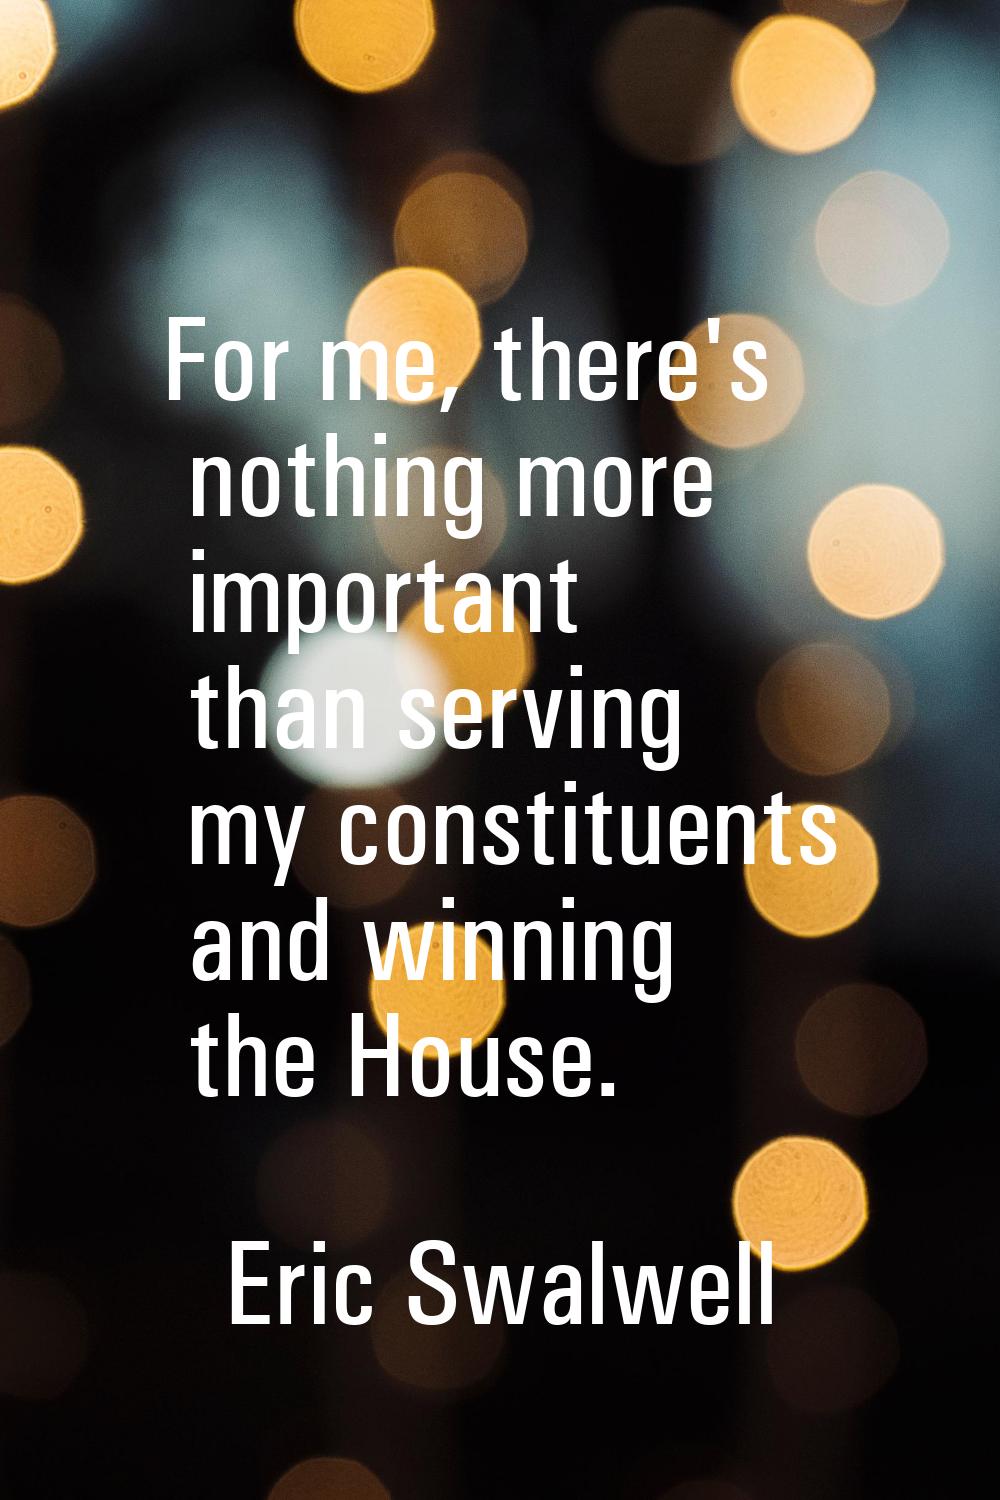 For me, there's nothing more important than serving my constituents and winning the House.